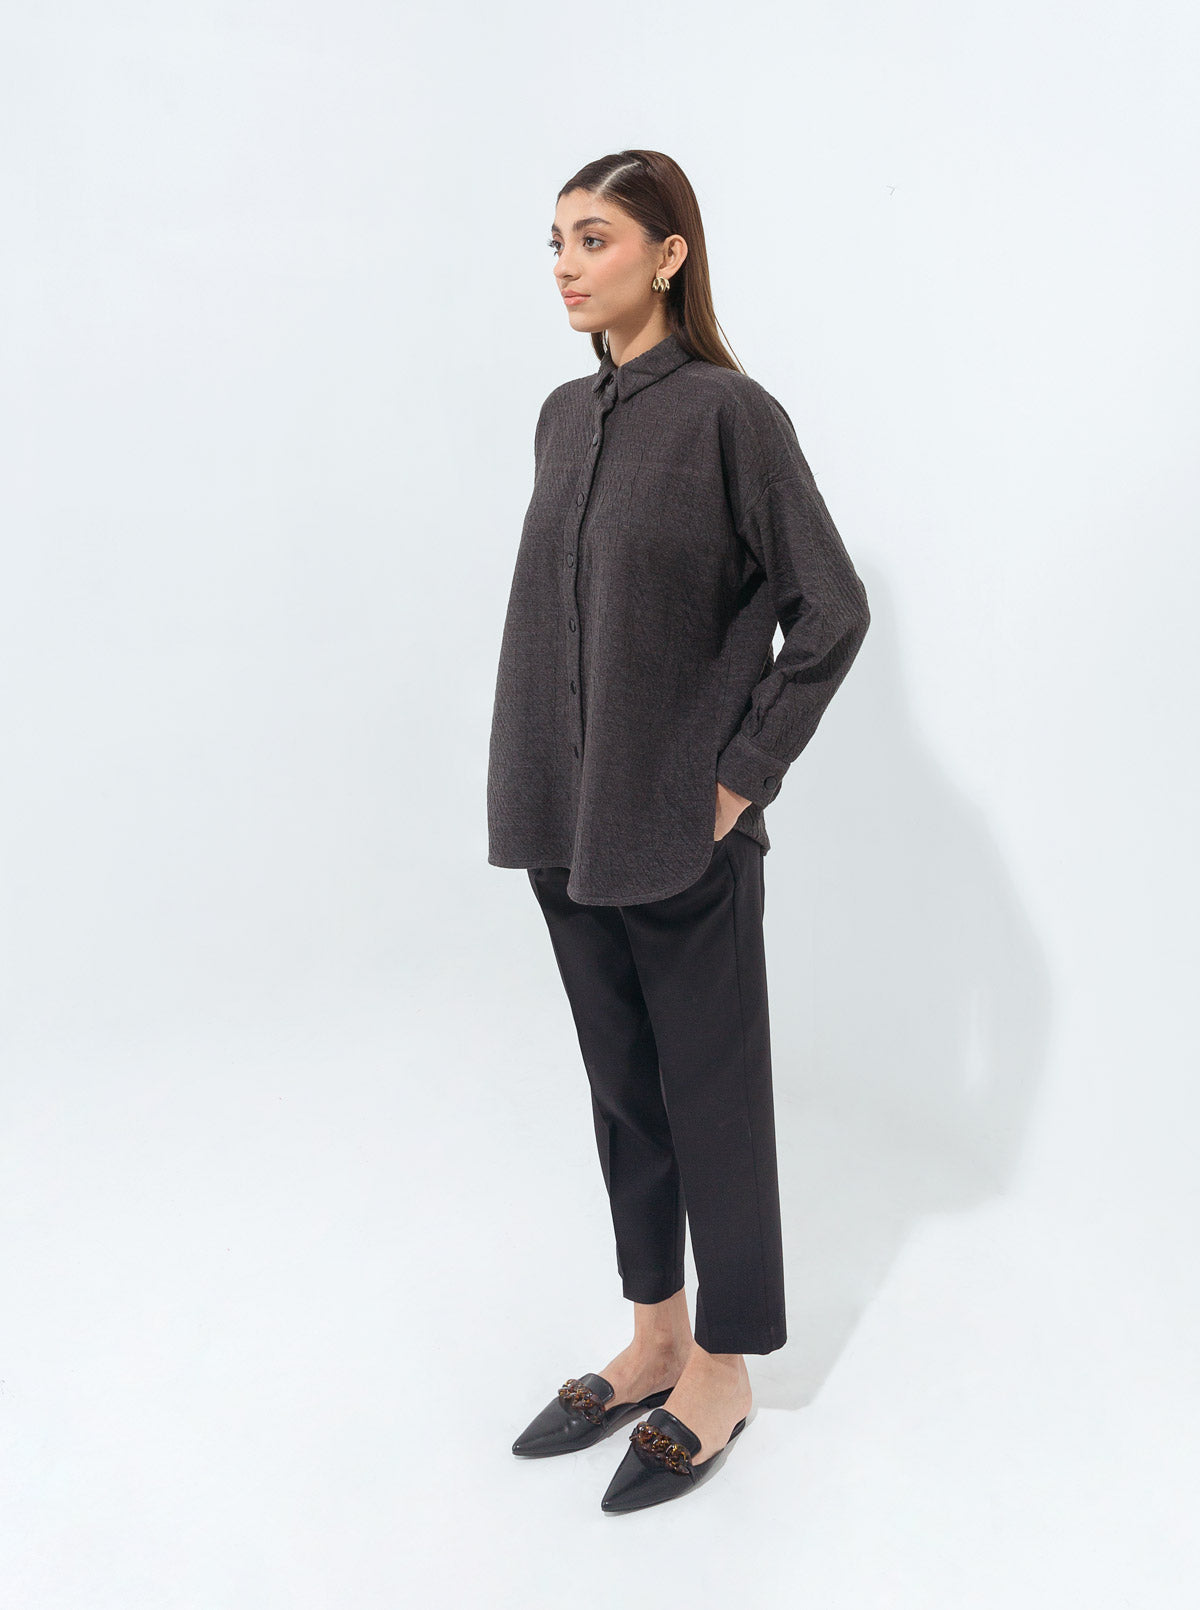 Charcoal Gray Textured Knit Top - BEECHTREE